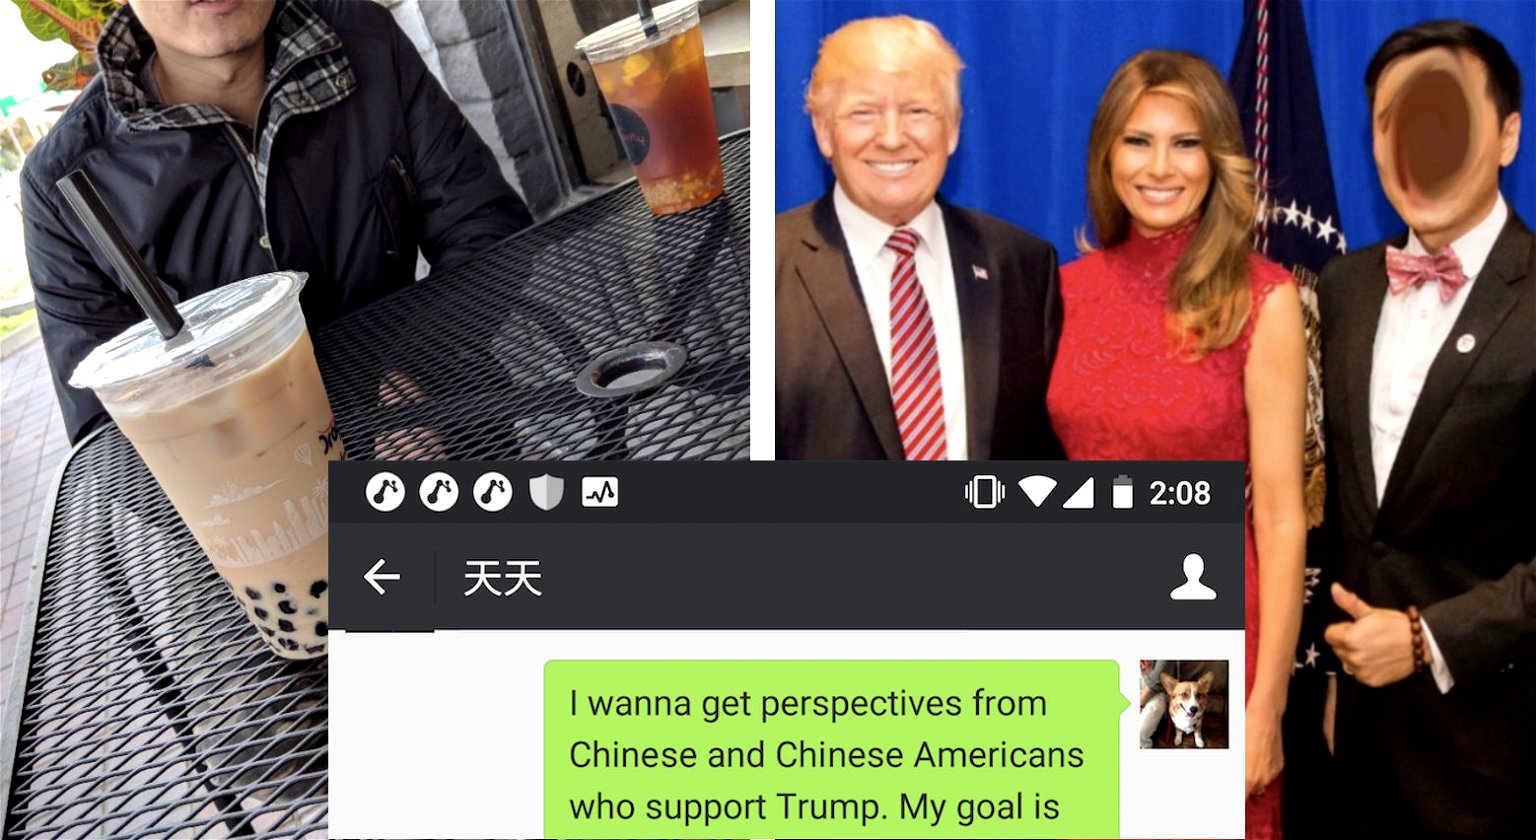 Meet the Mysterious Chinese Trump Supporter Who Gets Over 500,000 WeChat Messages a DAY